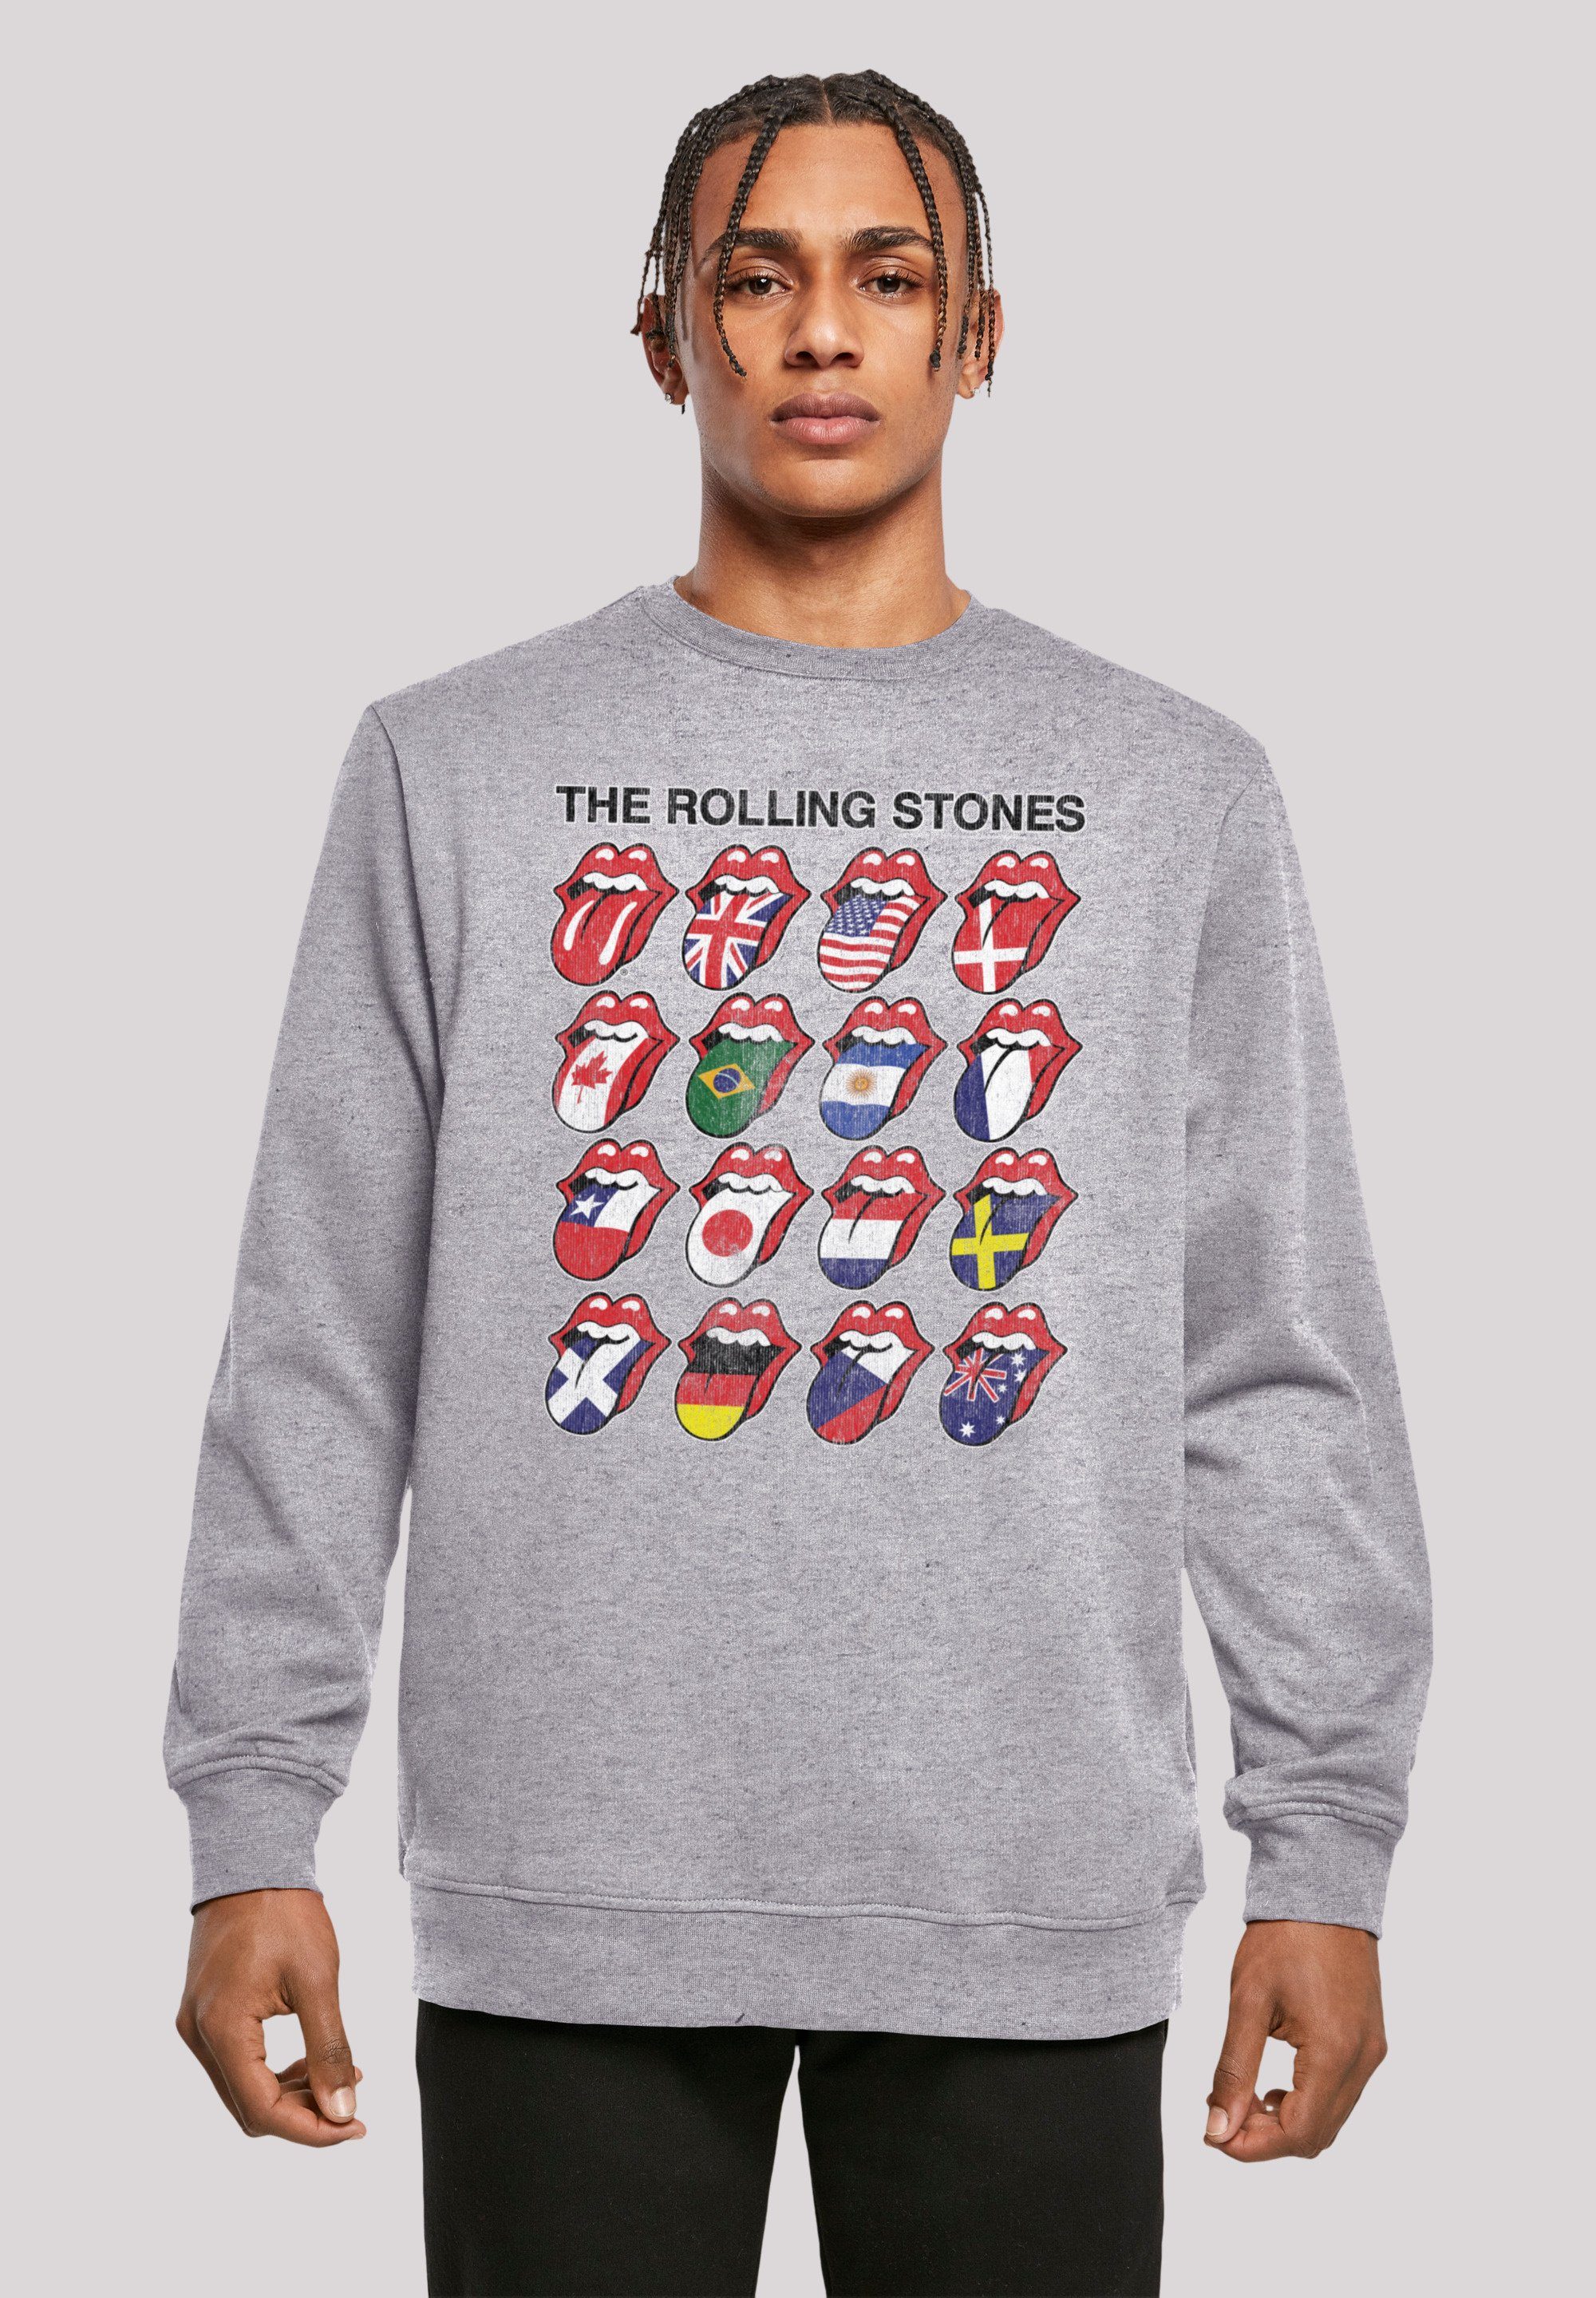 Logo, Tongues F4NT4STIC Rolling The Offiziell Stones Stones Rolling Sweatshirt lizenziertes Voodoo Band, Musik, Lounge Sweatshirt